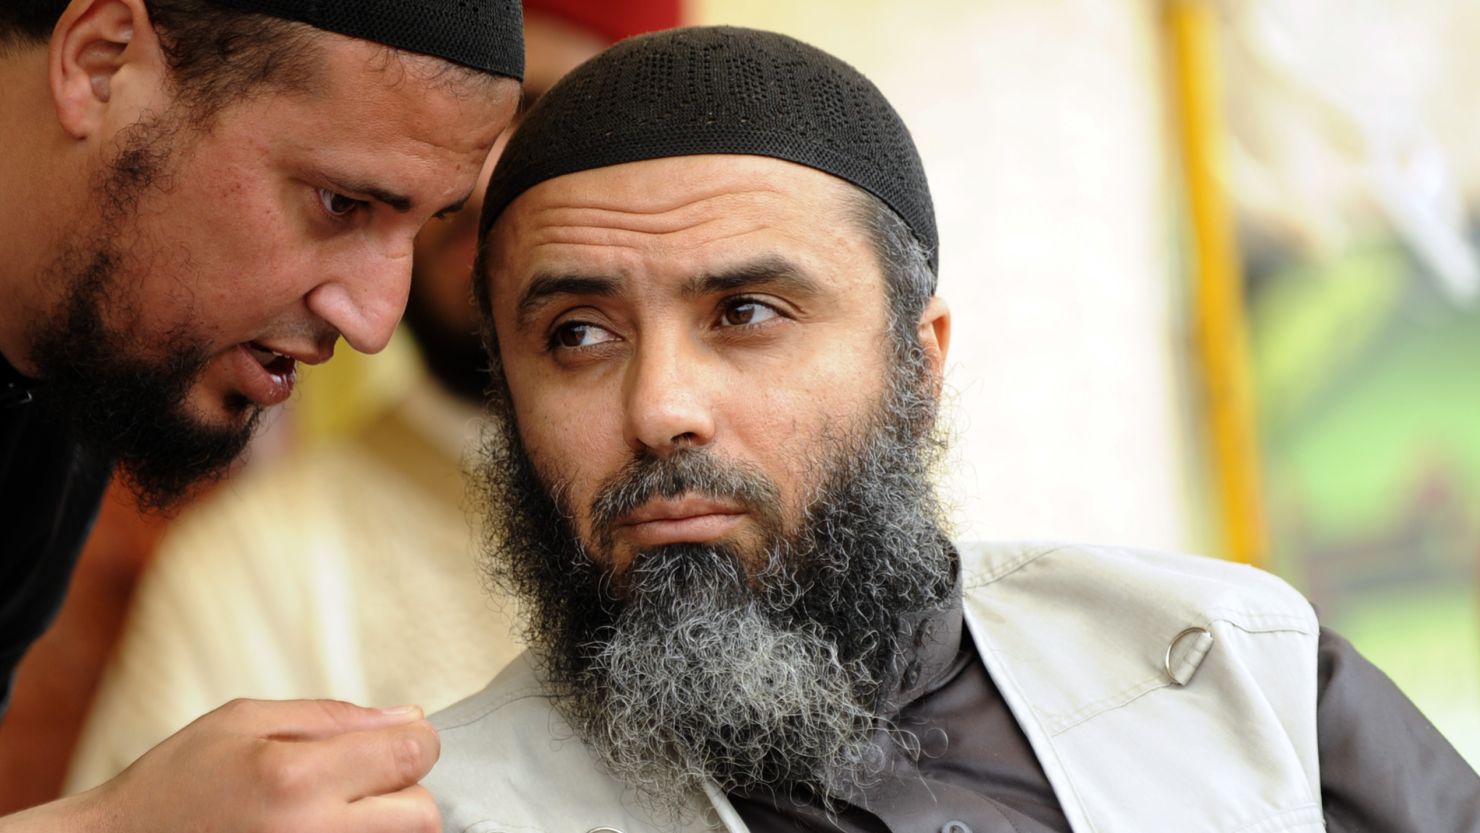 This file photo shows Seifallah Ben Hussein Mokni (R), also known as Abu Iyadh, leader of Tunisian Salafists at a meeting last year in Tunisia.